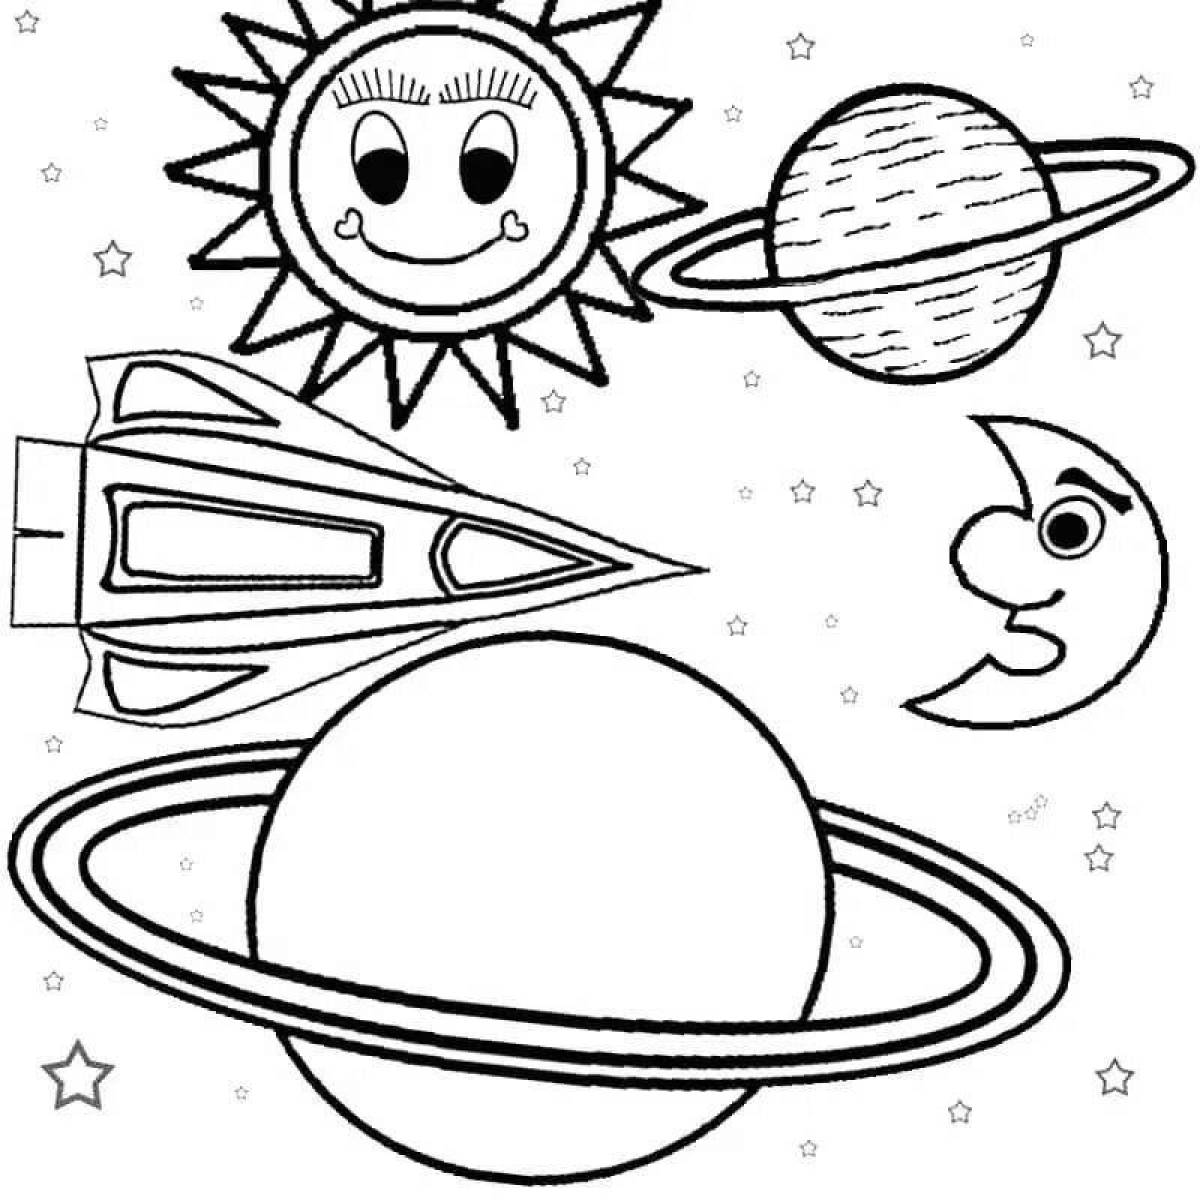 Space and planets for kids #1